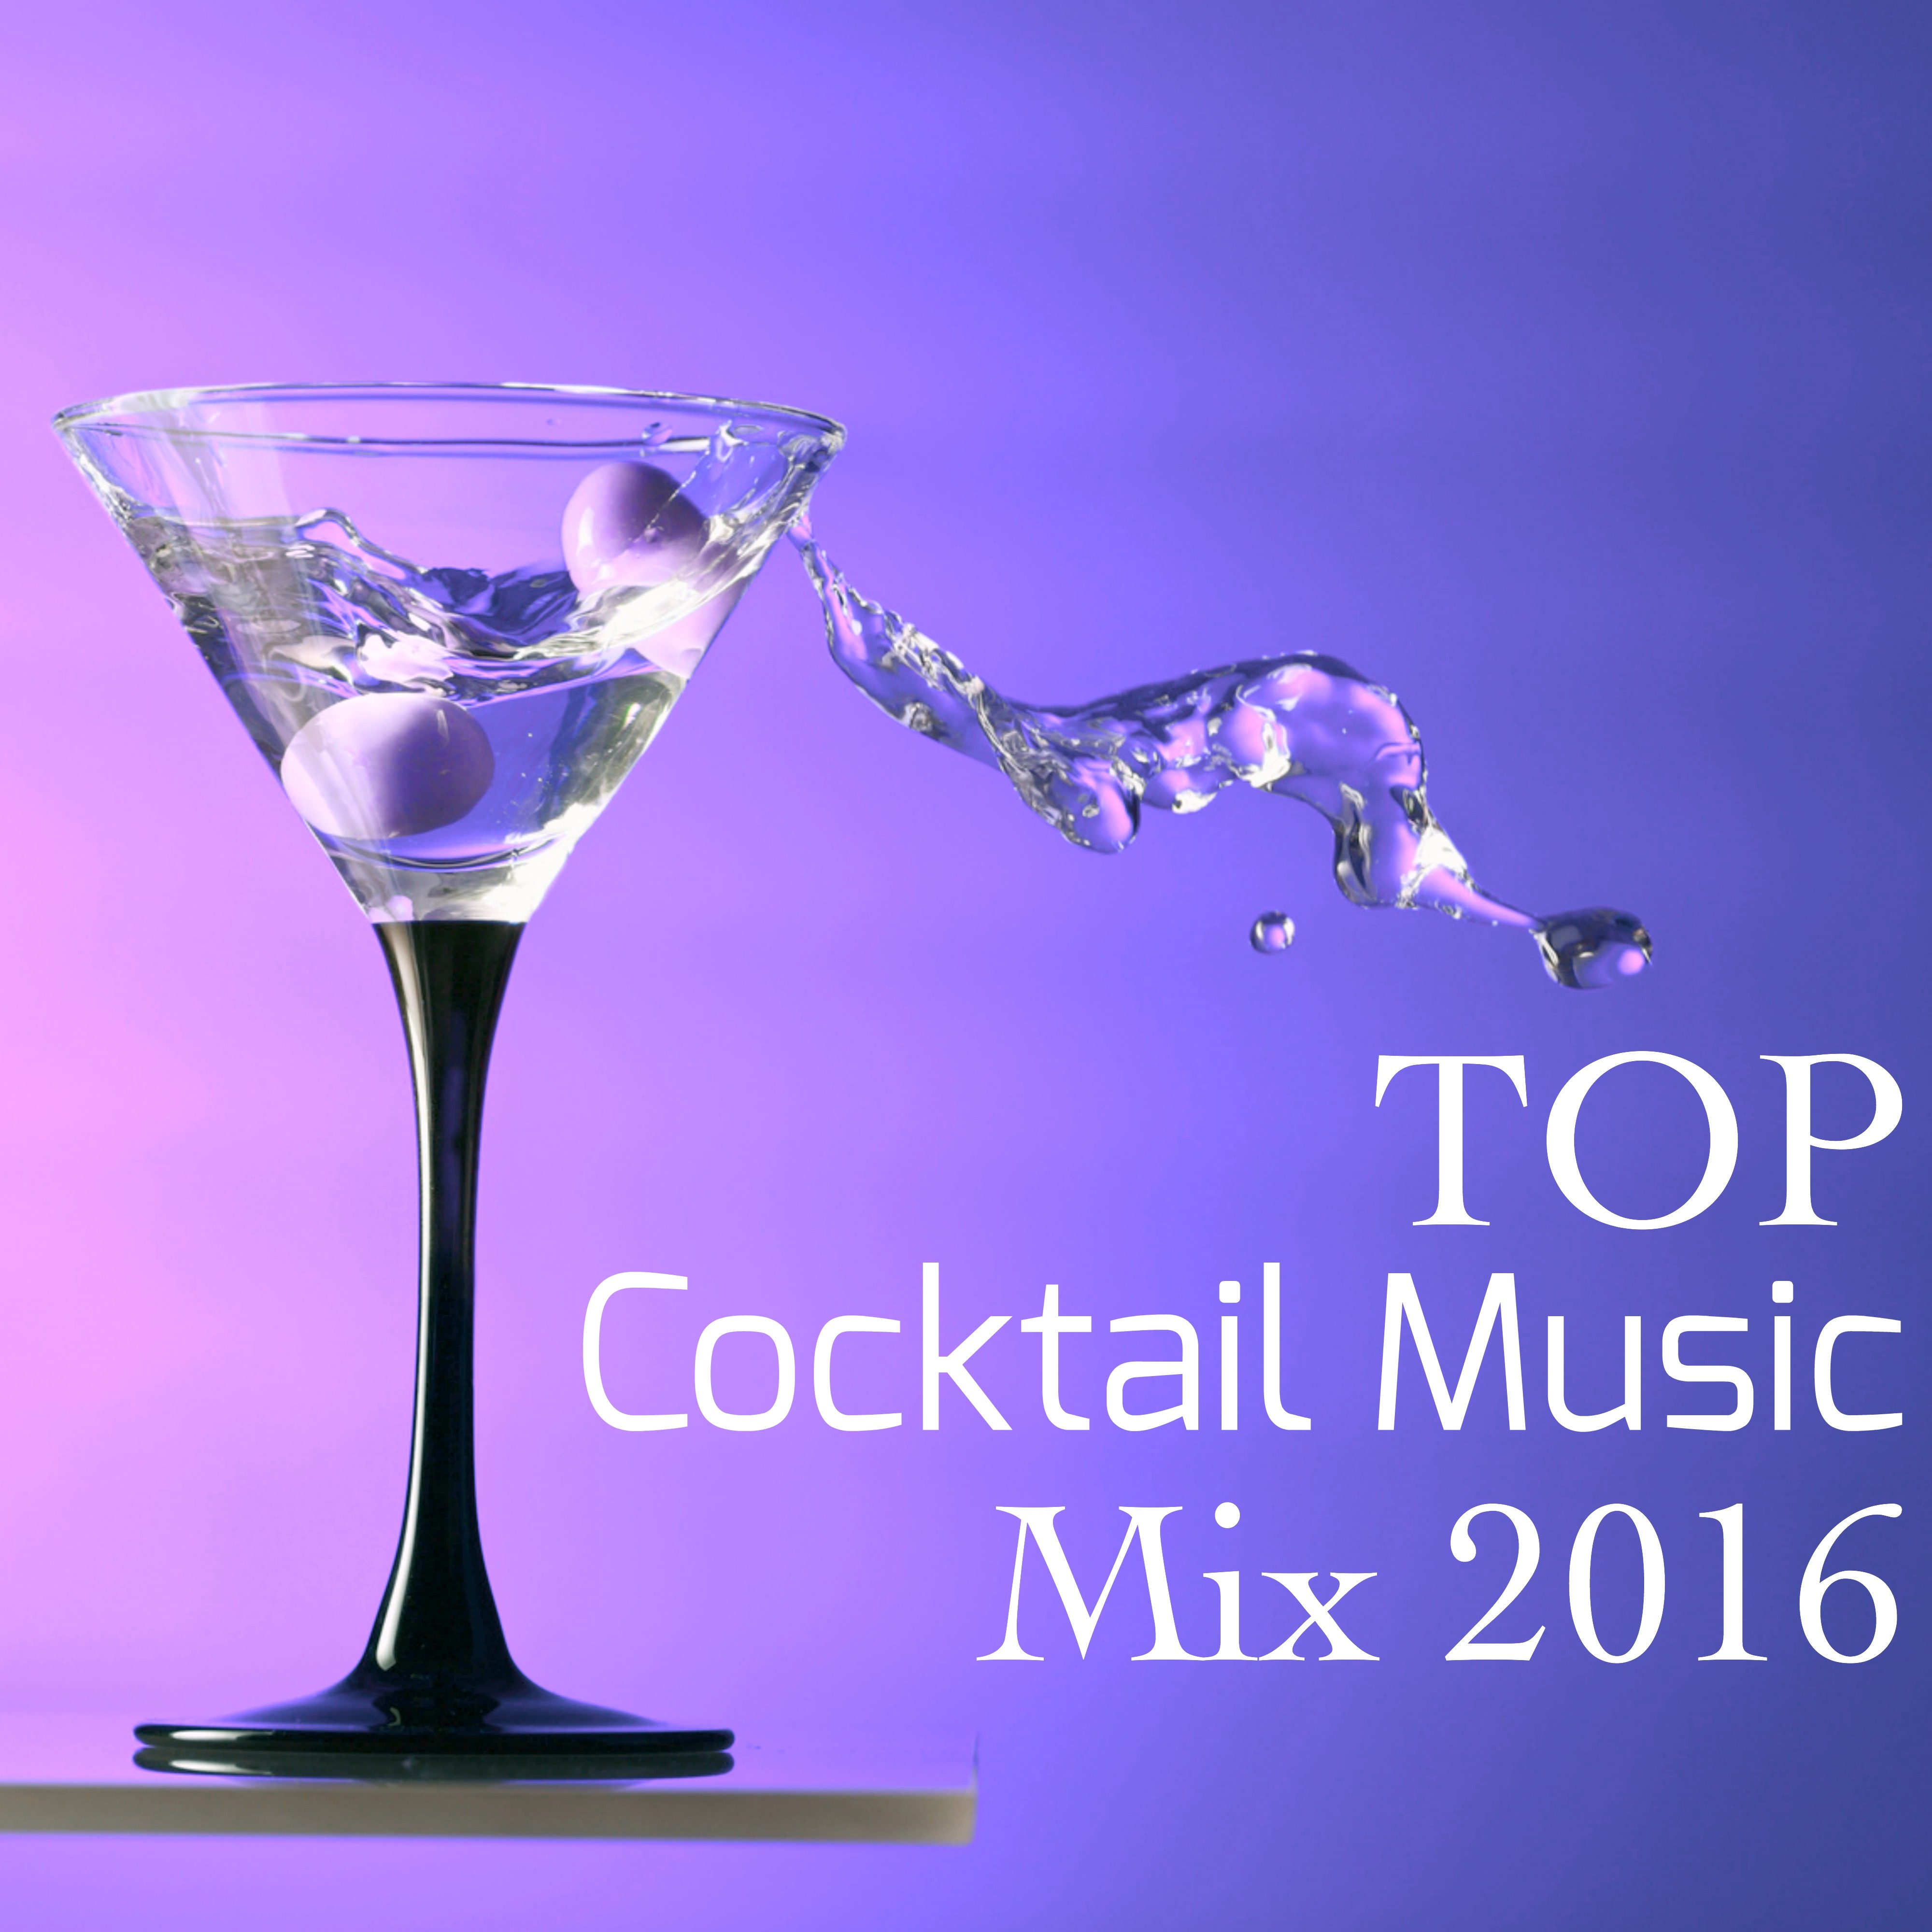 Top Cocktail Music Mix 2016  Lounge Music for Cocktail Party, Best Chillout Songs